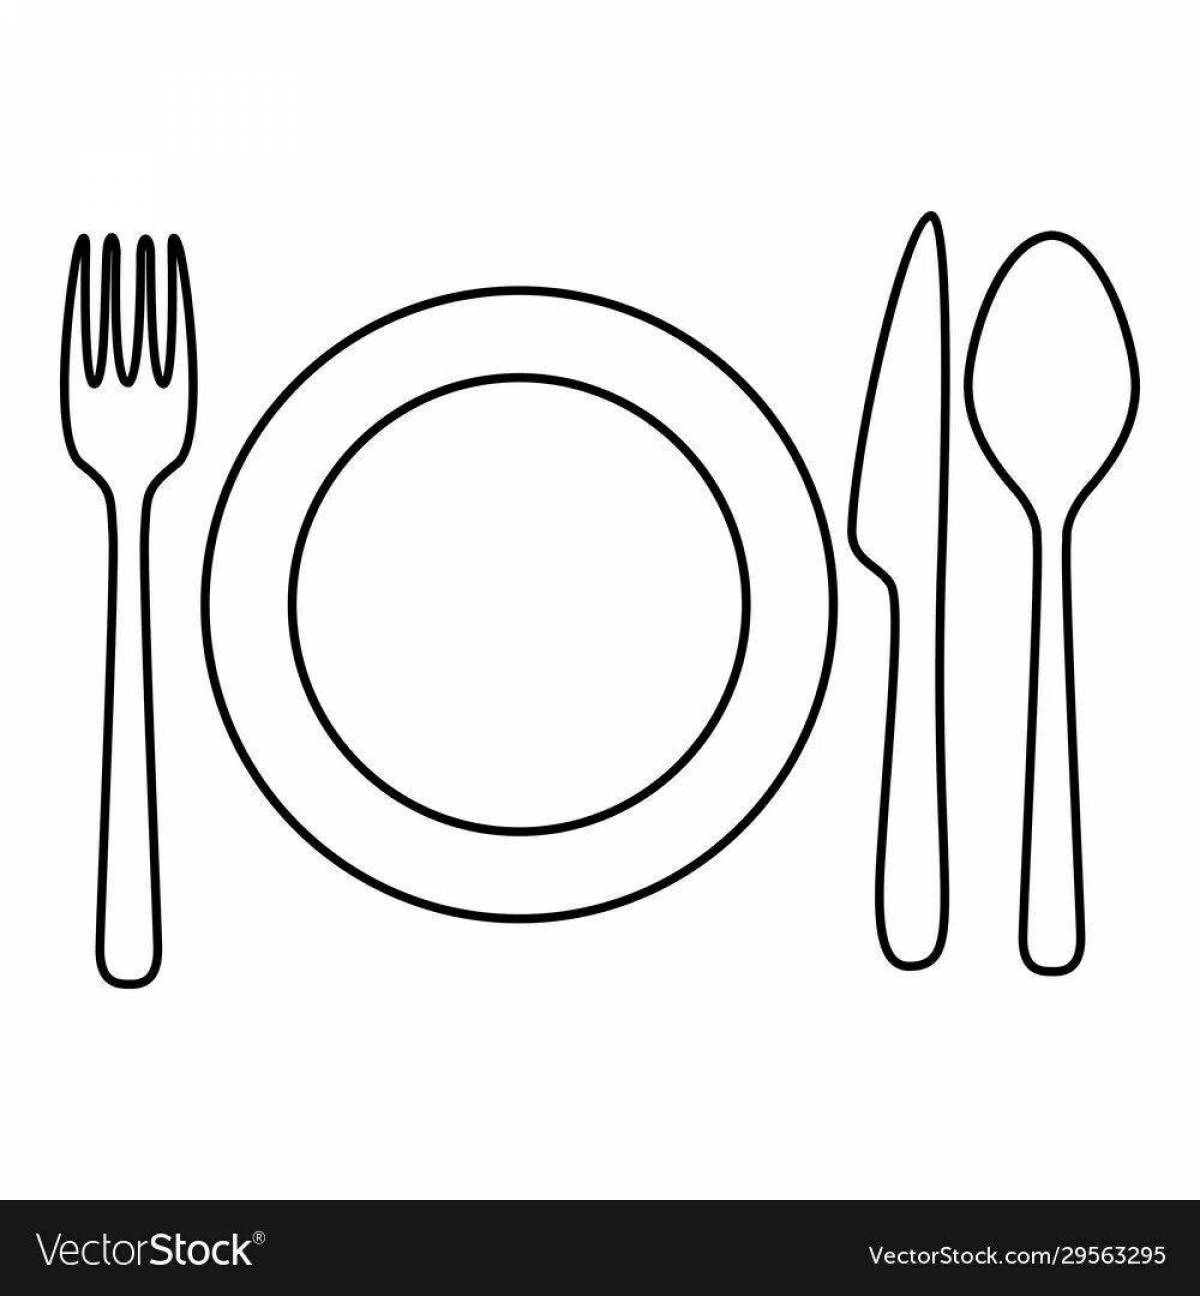 Attractive table setting coloring for kids